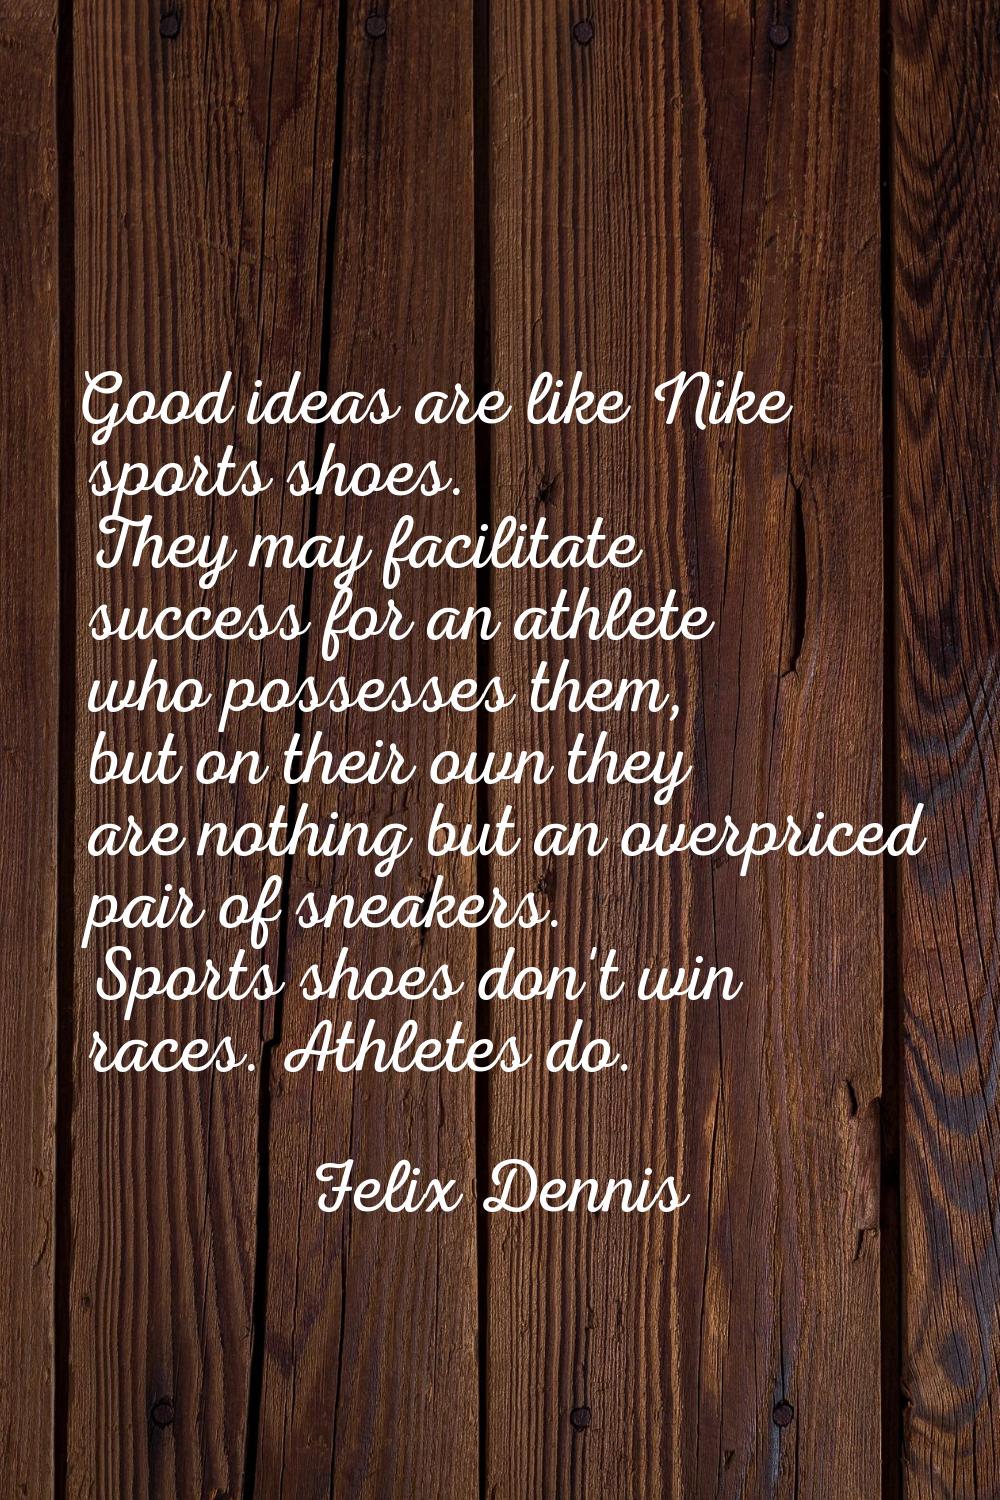 Good ideas are like Nike sports shoes. They may facilitate success for an athlete who possesses the